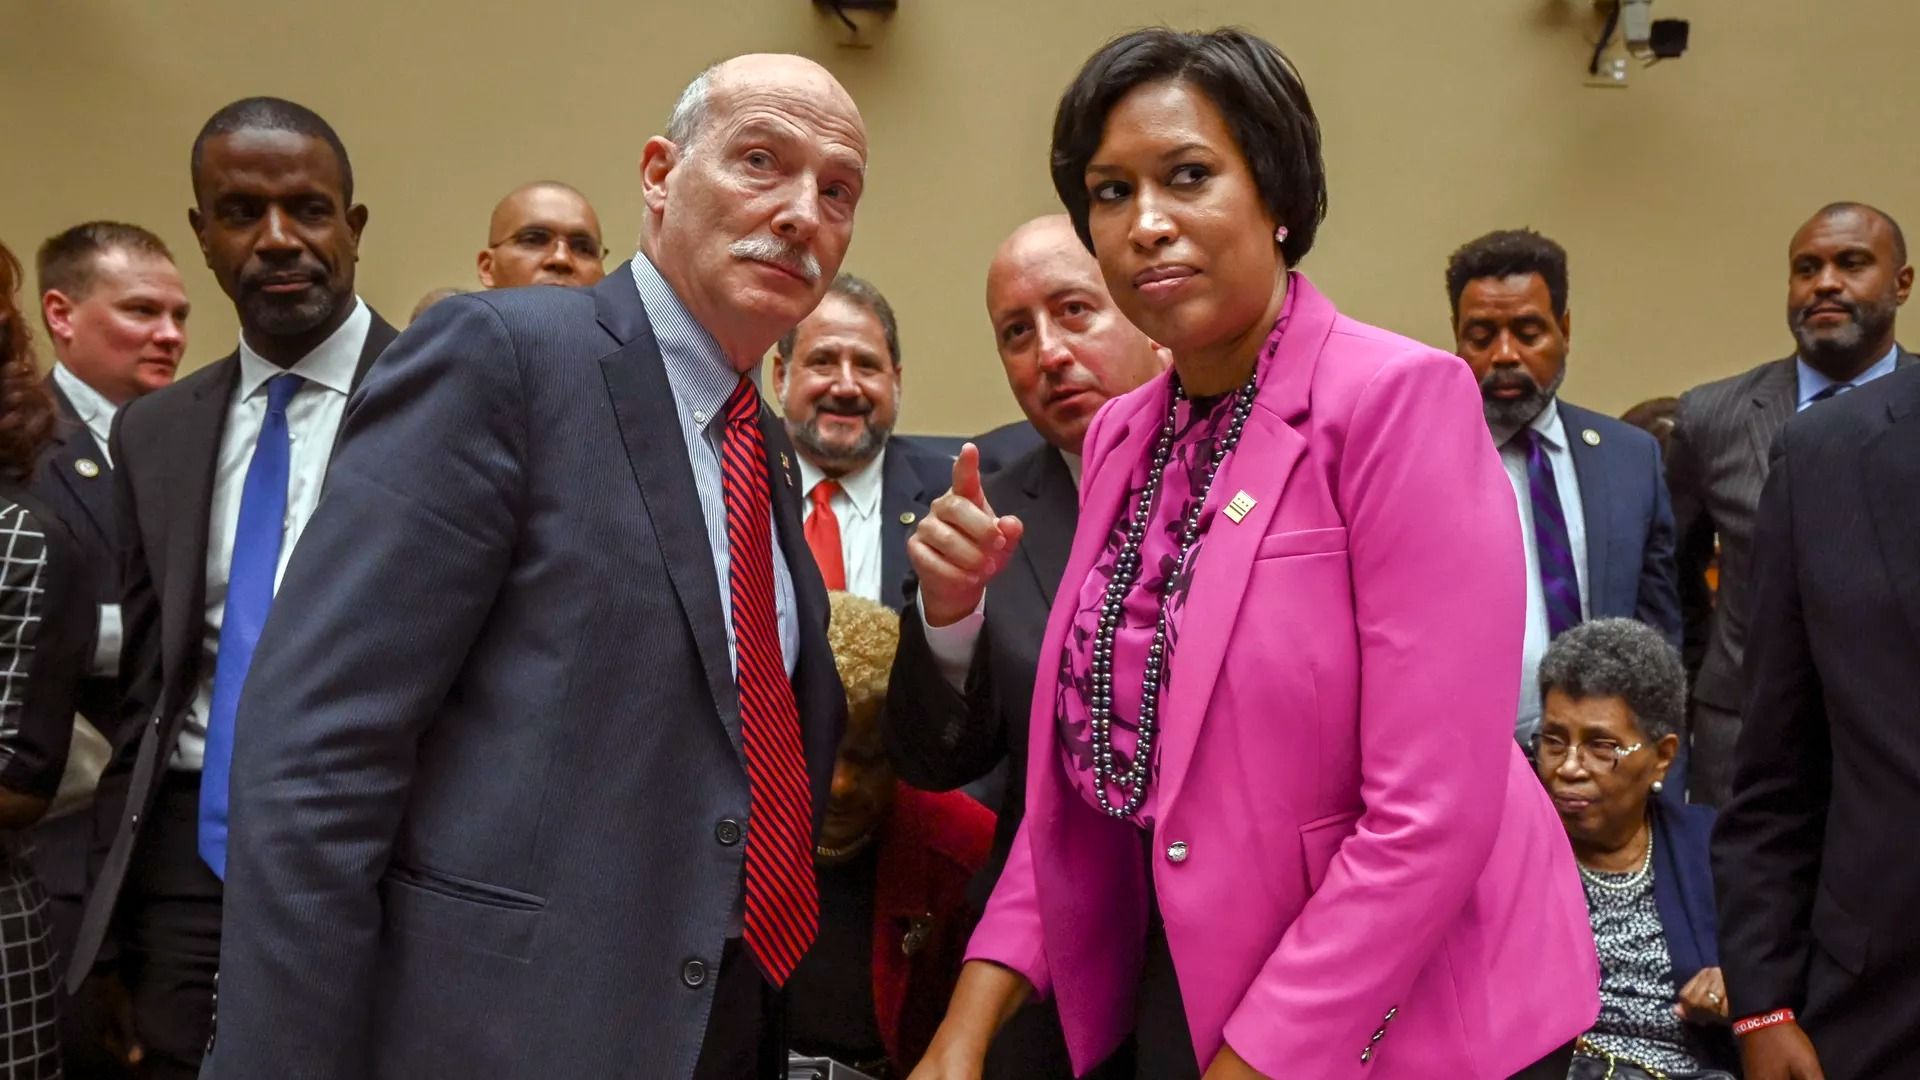 D.C. Mayor Muriel Bowser and DC Council Chair Phil Mendelson 